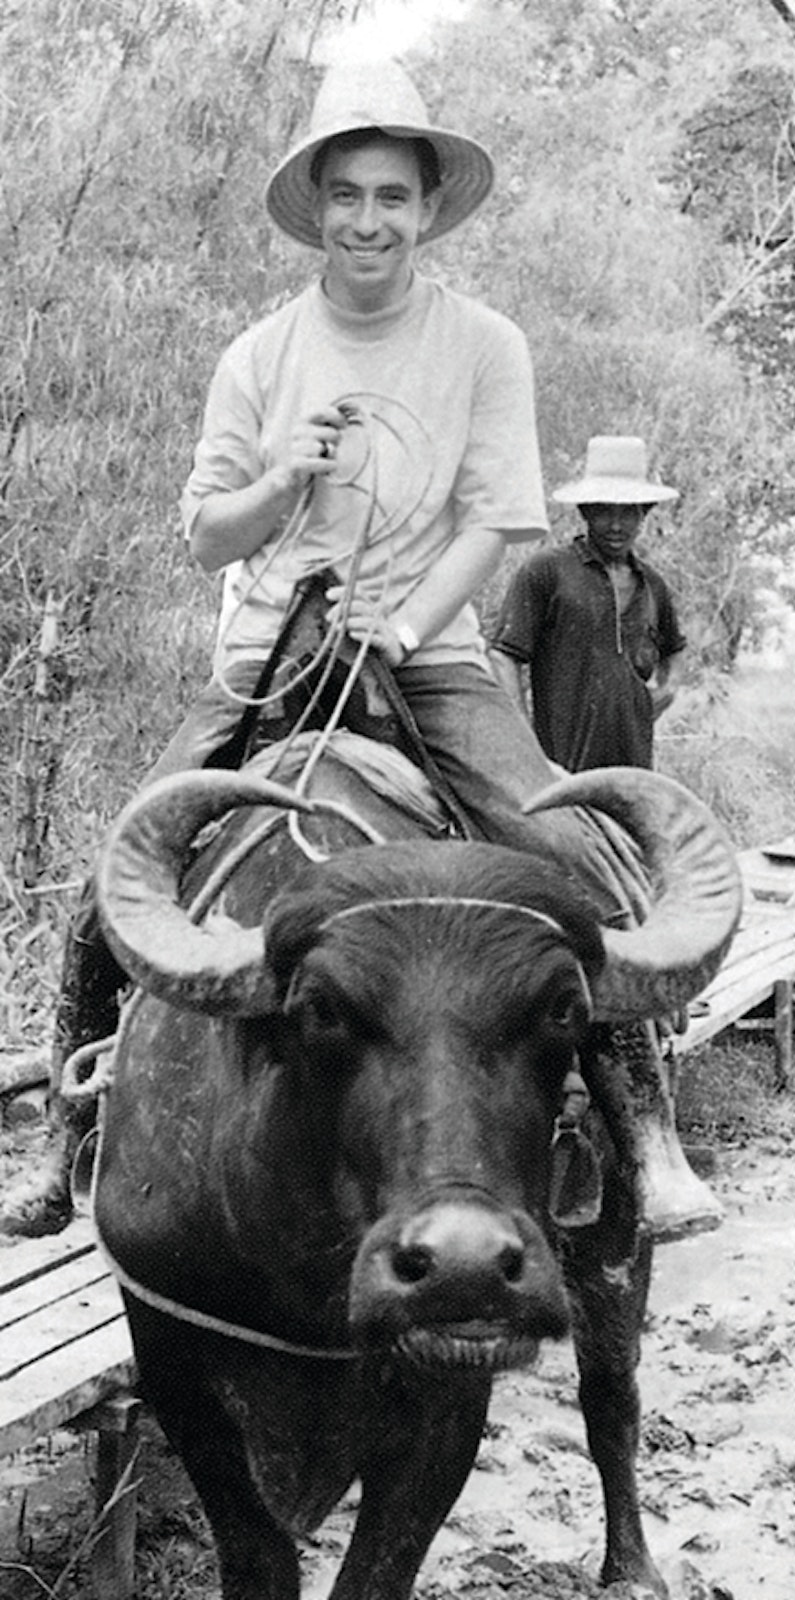 American PIME missionary Fr. Dennis Koltz rides a yak in his mission in Brazil in this undated photo.